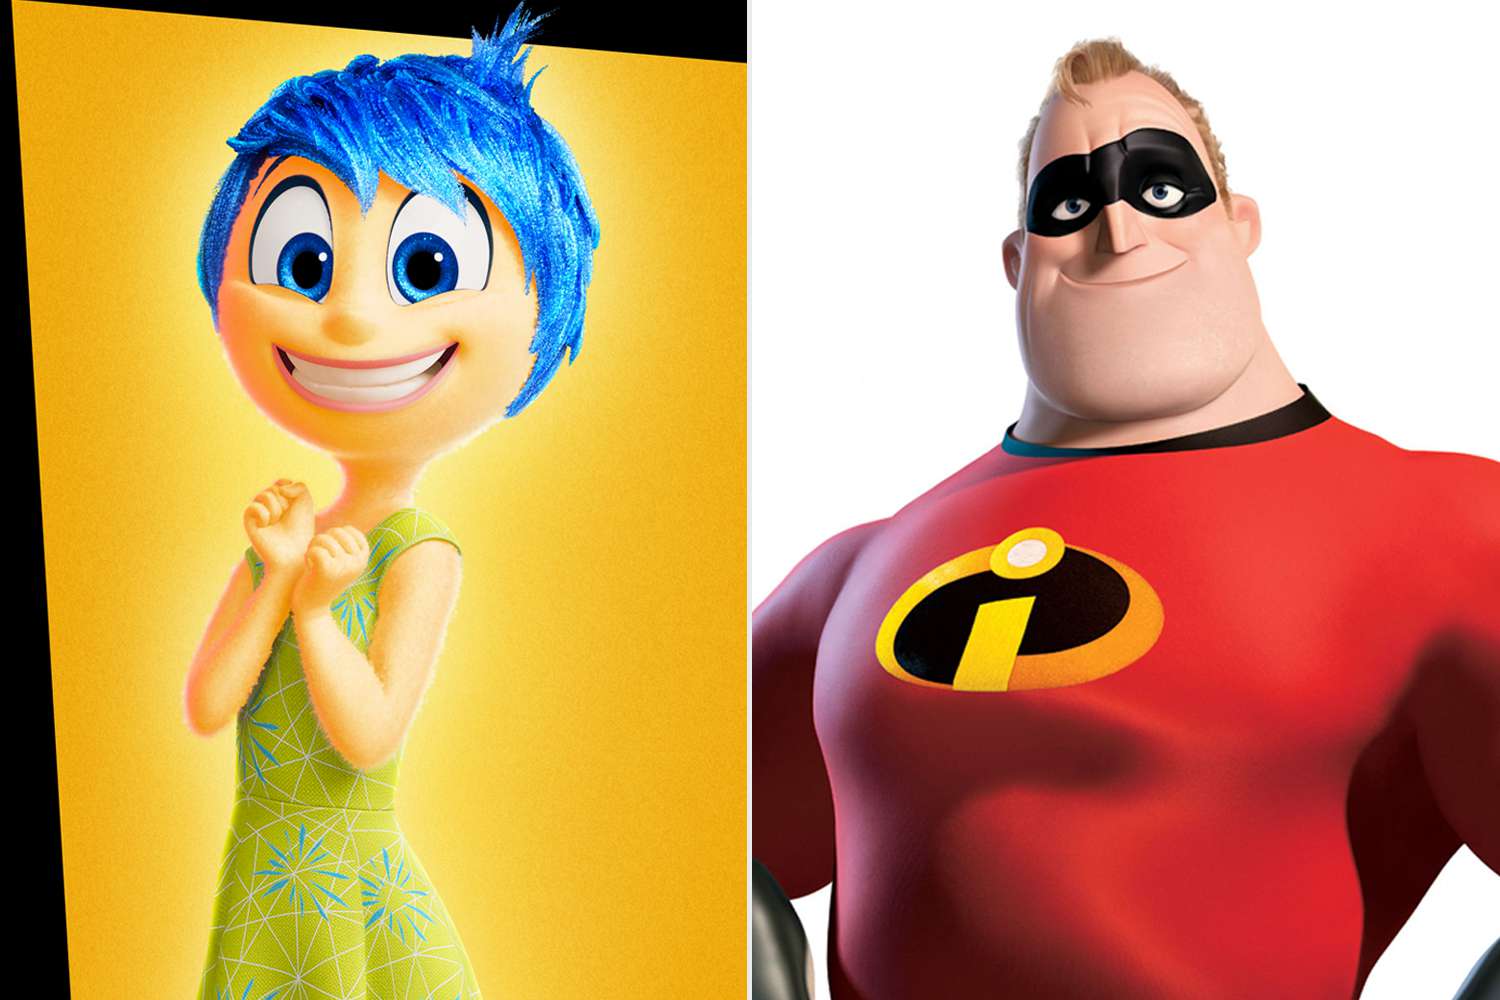 'Inside Out 2' passes 'Incredibles 2' as biggest Pixar box office hit